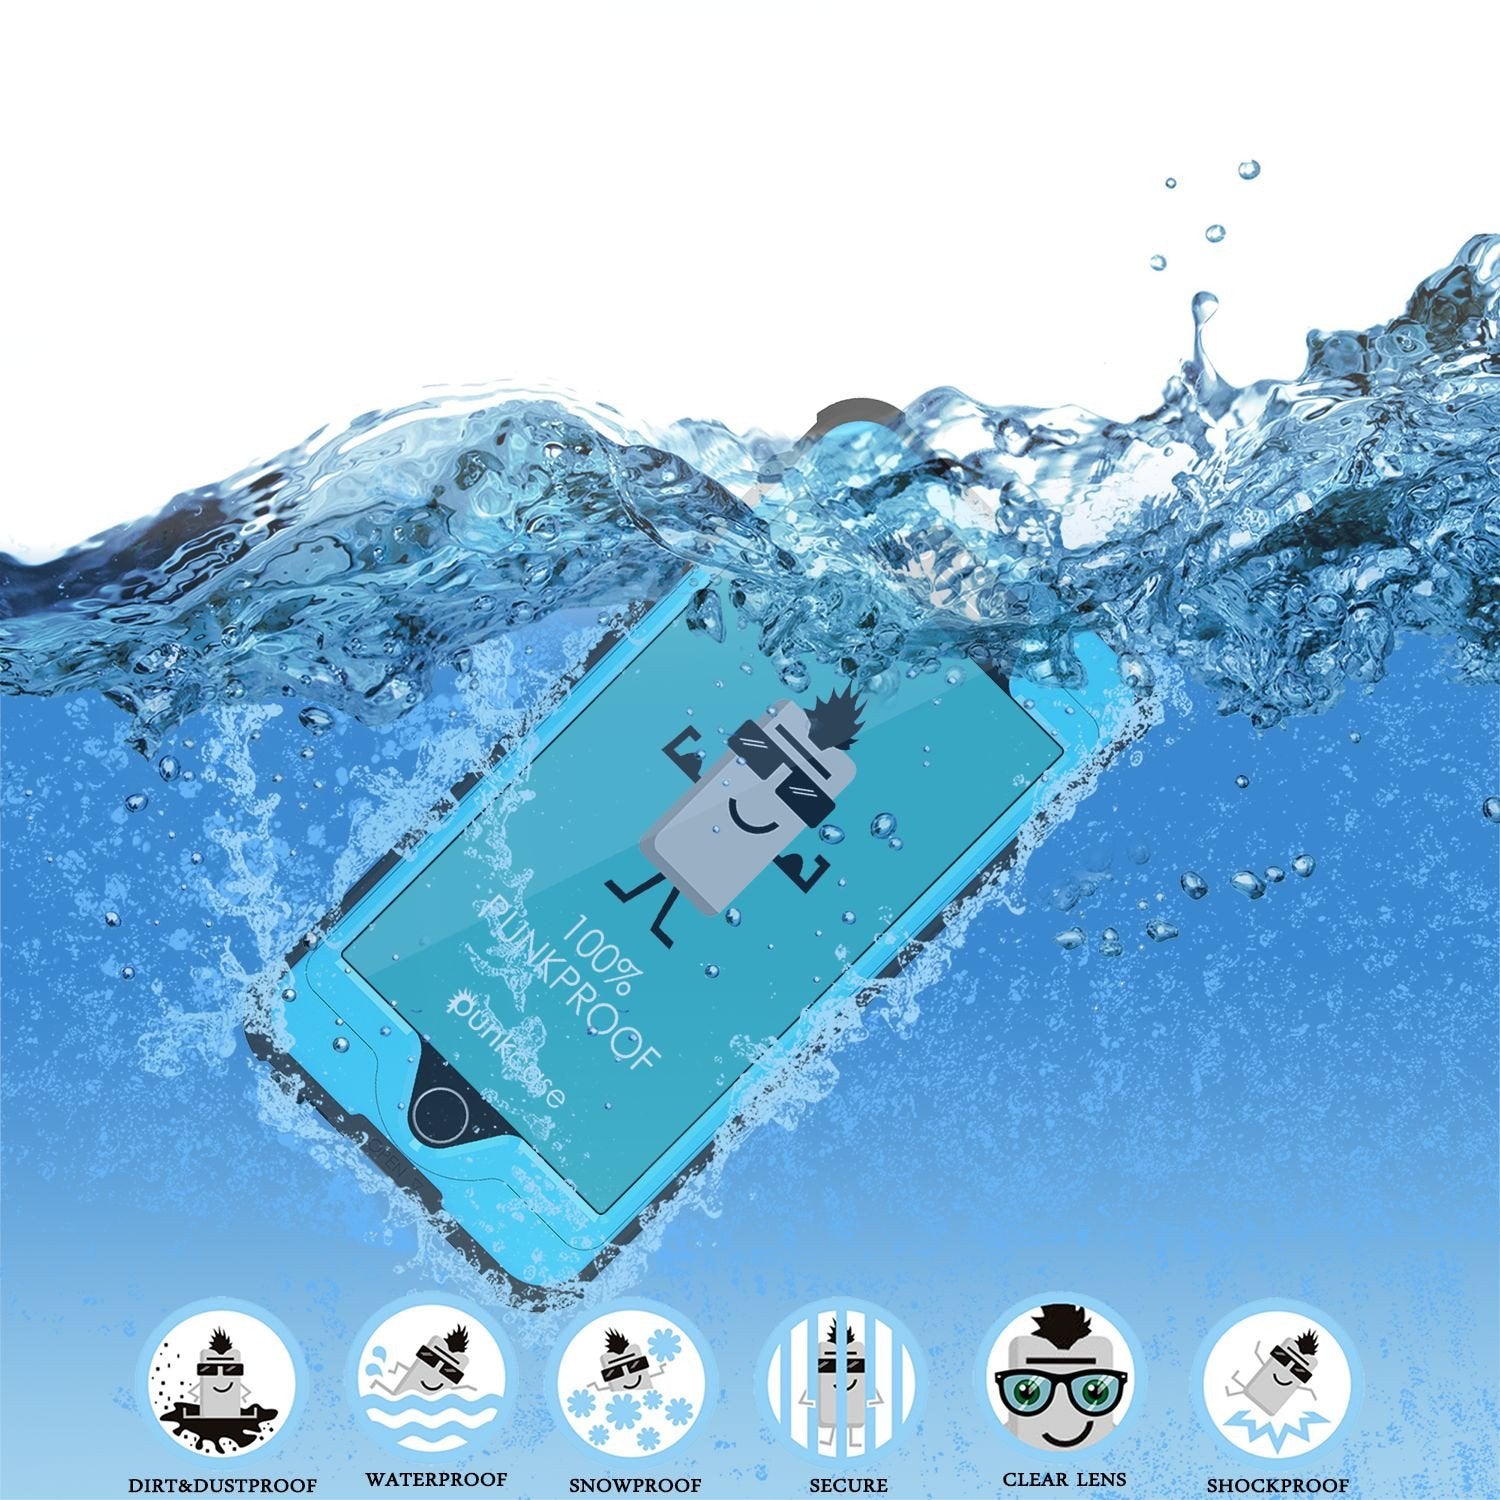 iPhone 6s/6 Waterproof Case, PunkCase StudStar Teal w/ Attached Screen Protector | Lifetime Warranty